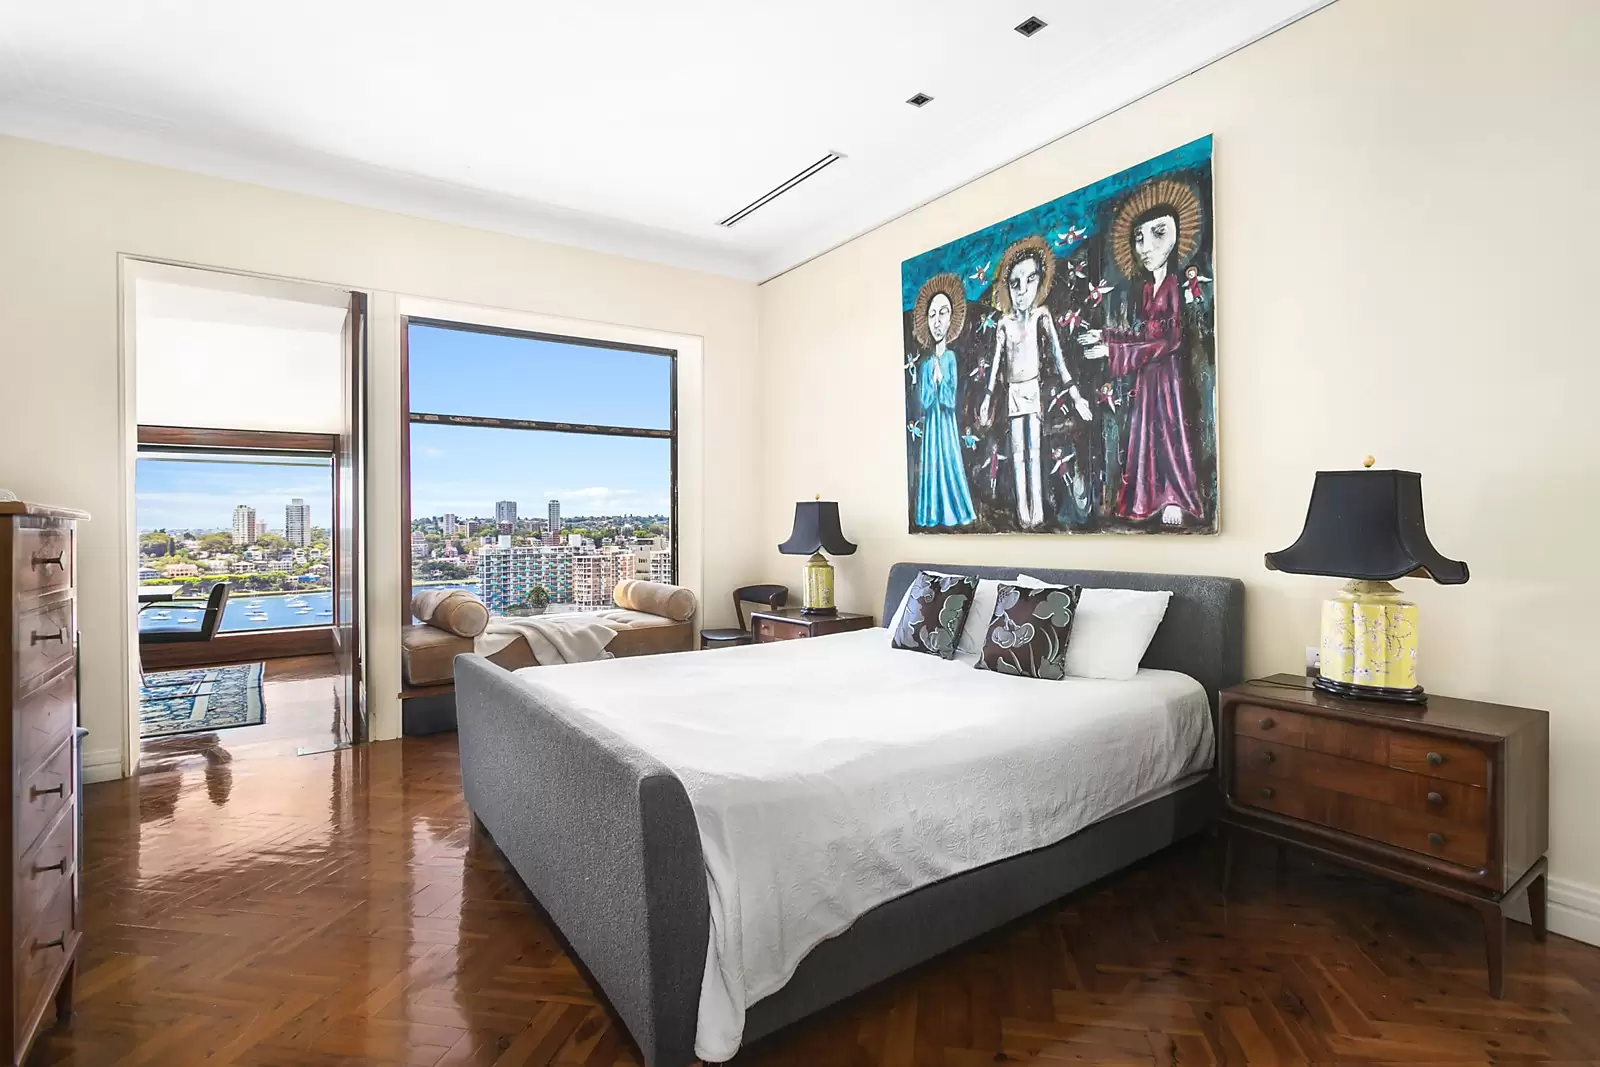 Photo #7: 906/12 Macleay Street, Potts Point - Sold by Sydney Sotheby's International Realty